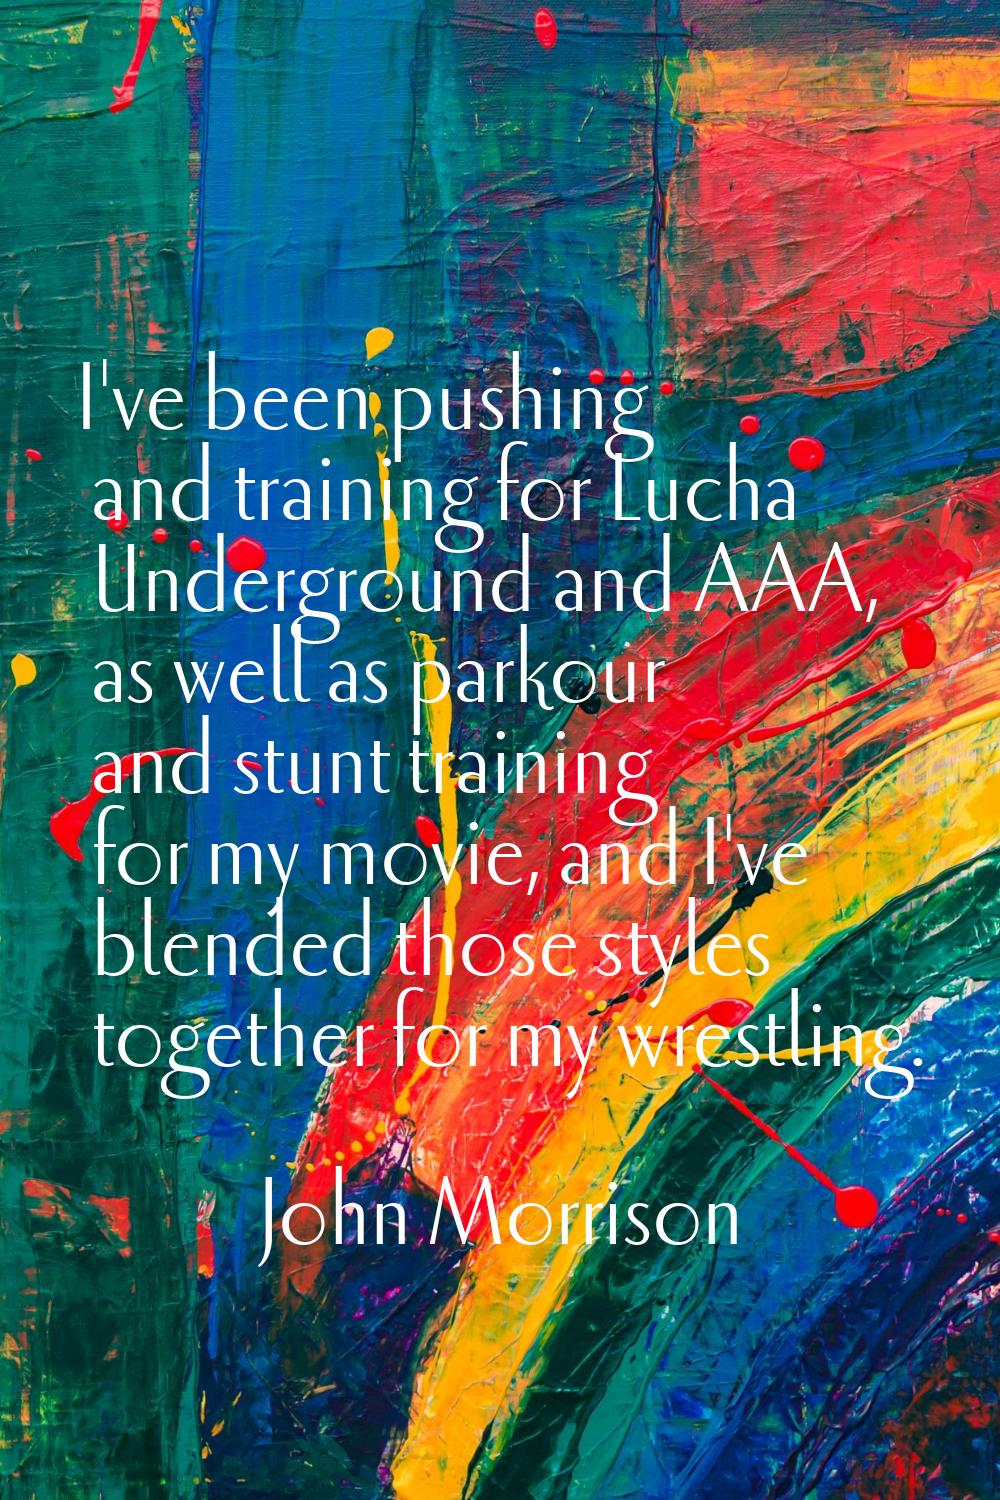 I've been pushing and training for Lucha Underground and AAA, as well as parkour and stunt training